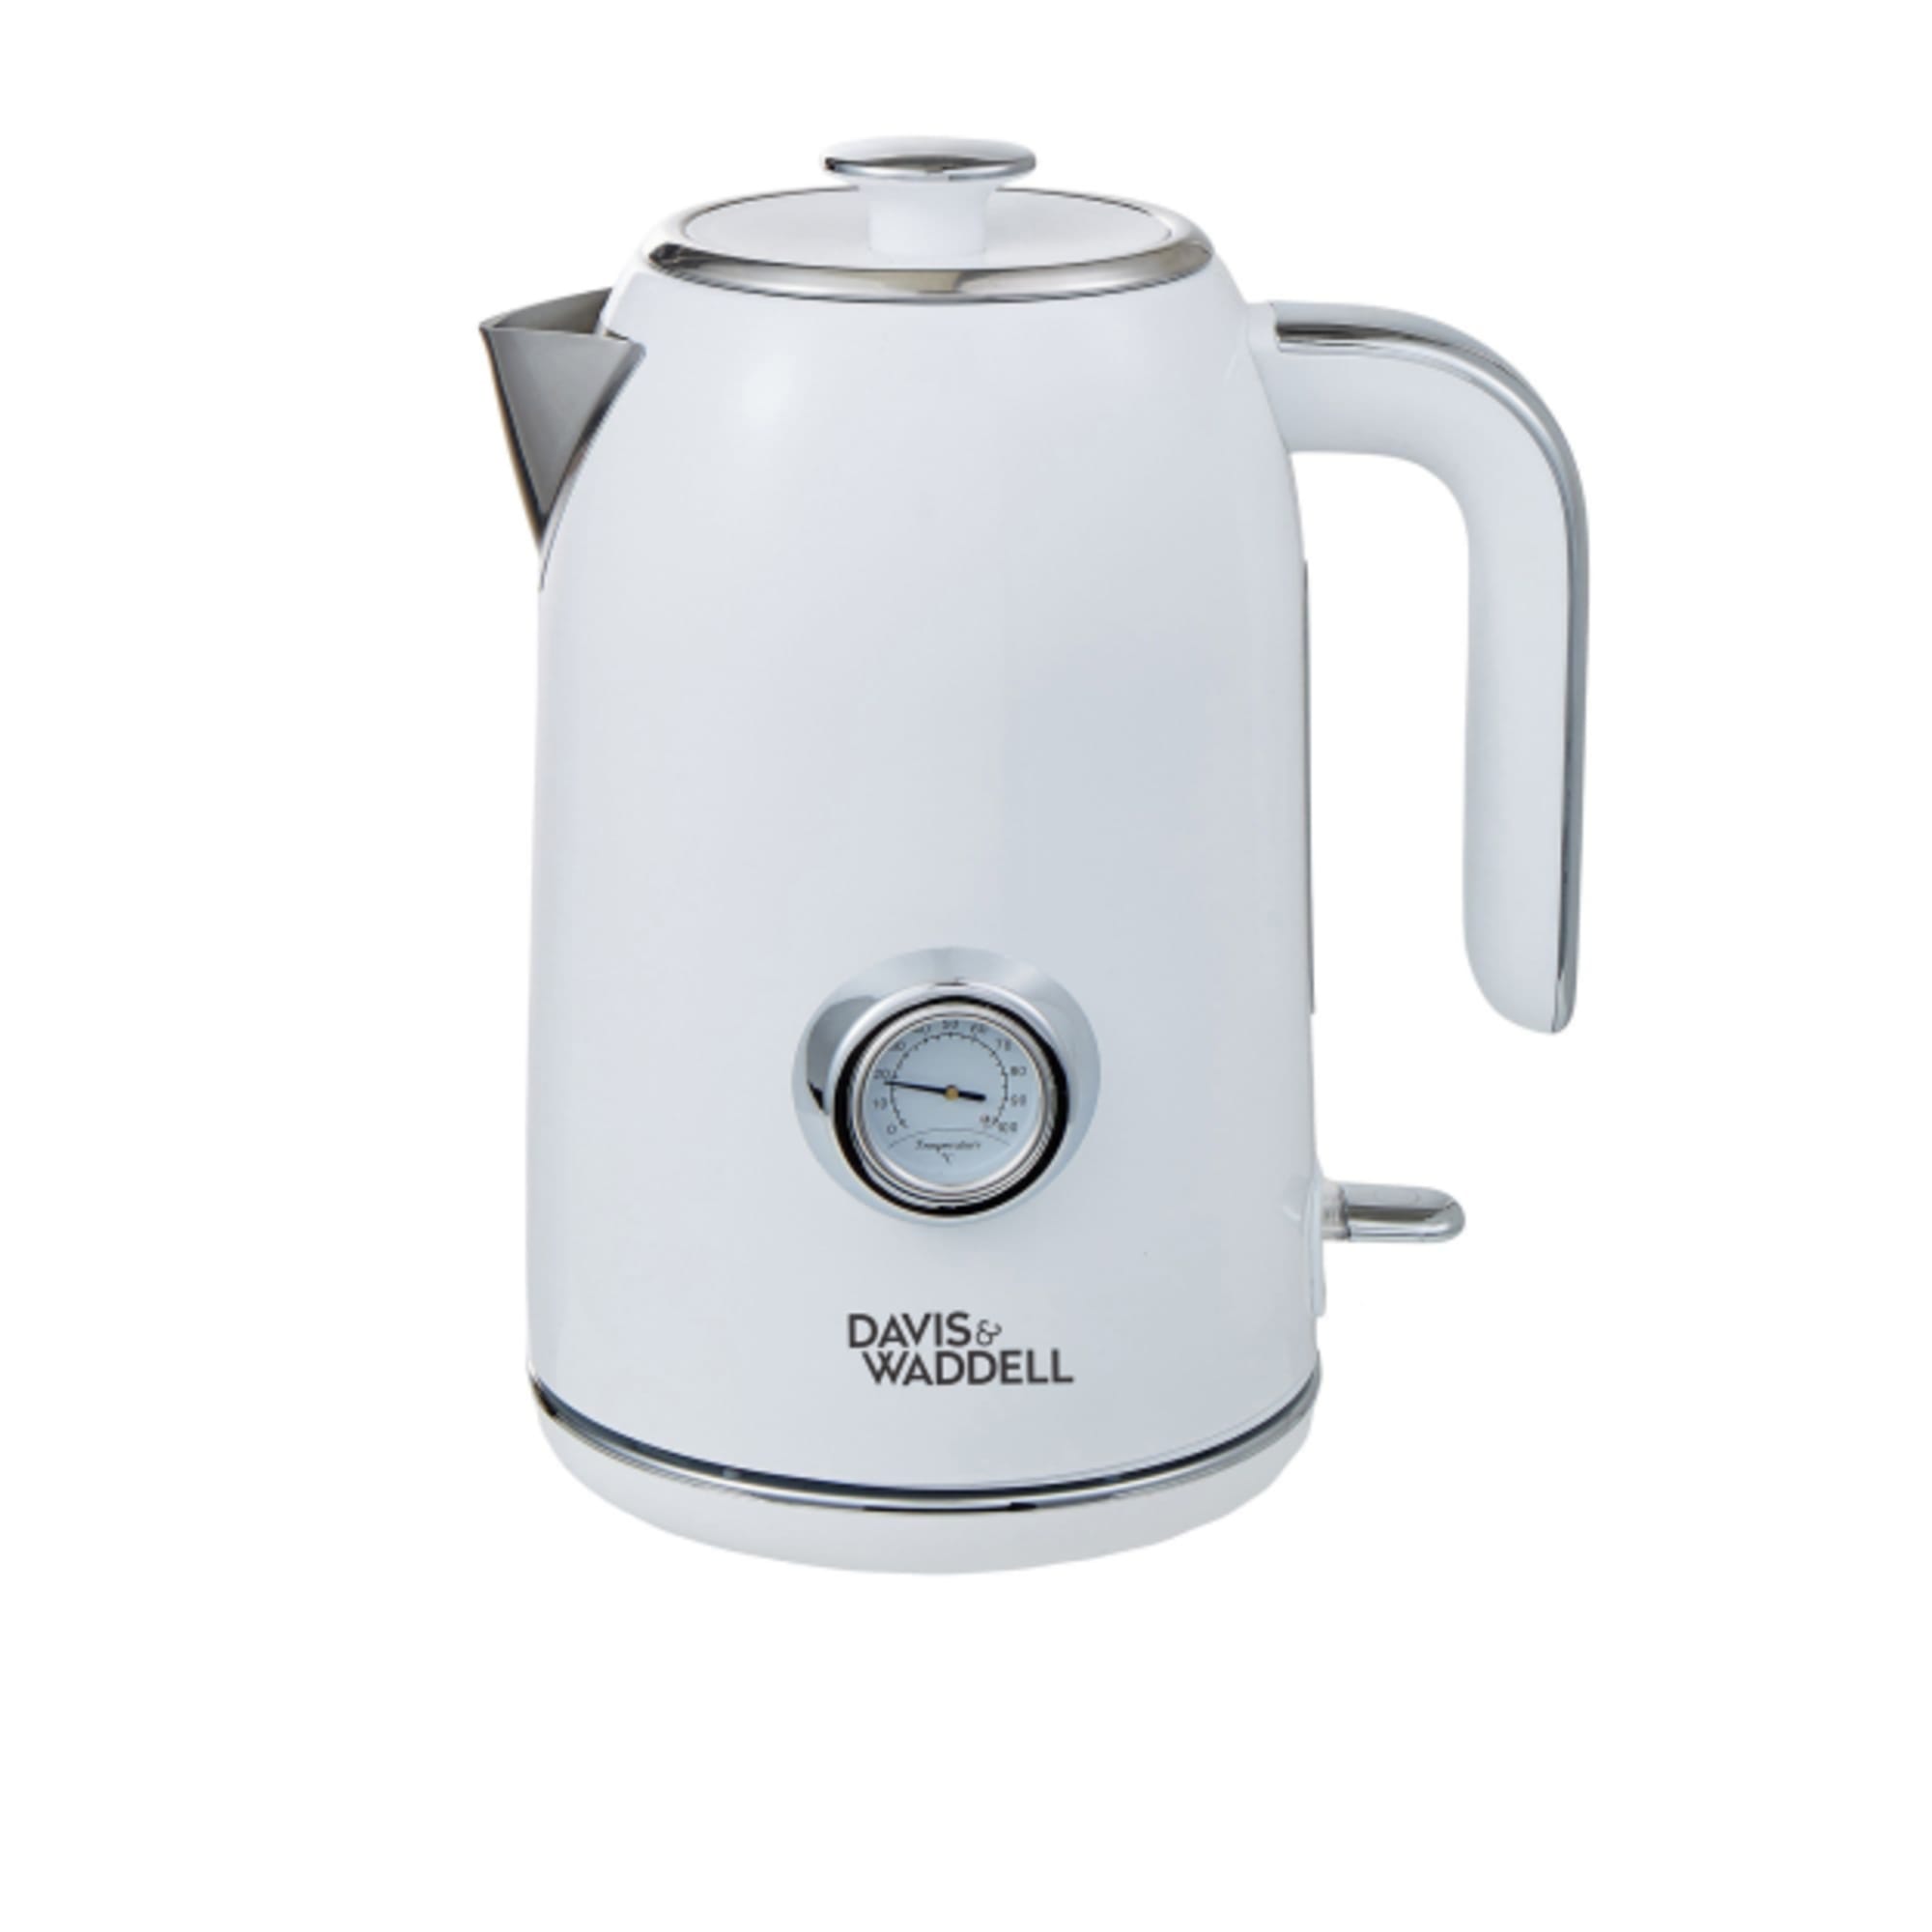 https://res.cloudinary.com/kitchenwarehouse/image/upload/c_fill,g_face,w_625/f_auto/t_PDP_2000x2000/Supplier%20Images%20/2000px/Davis-Waddell-Manor-Electric-Kettle-1-7L-White_1_2000px.jpg